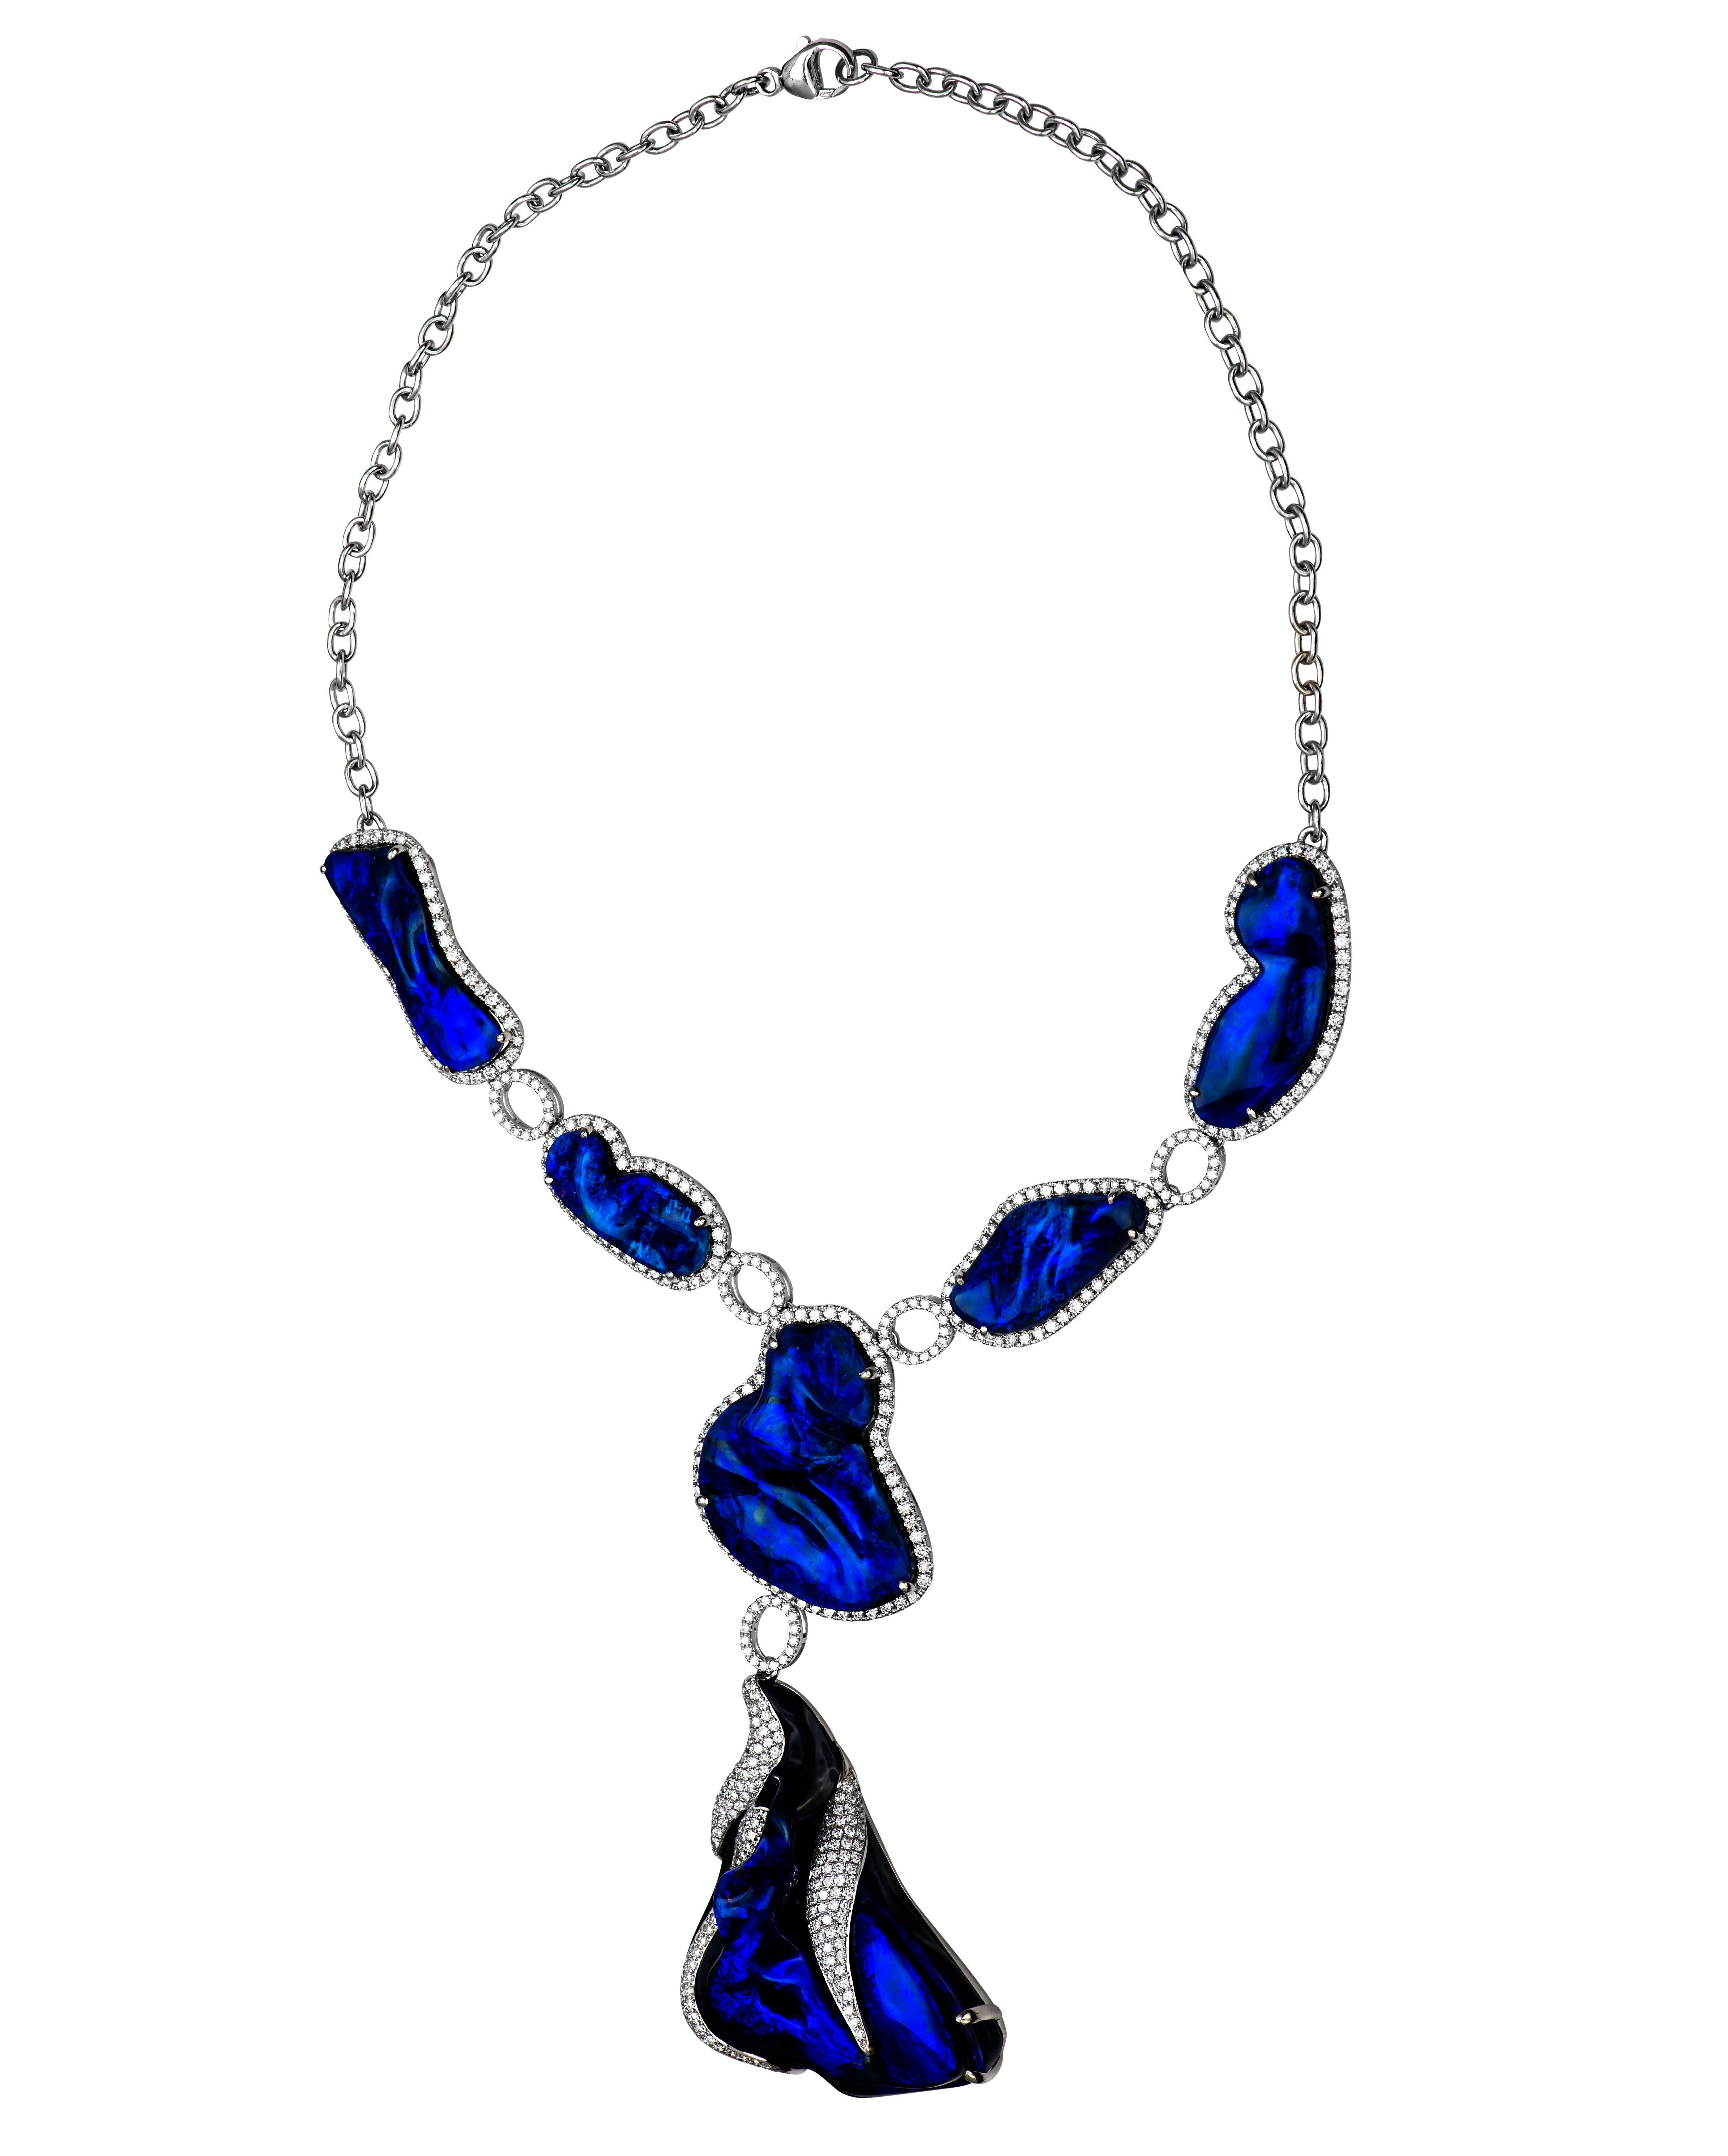 This outrageous necklace is one of the most coveted, spectacular pieces we have ever seen. With a whopping 197.00ct total weight in natural black opals from Lightning Ridge, Australia, this two-time AGTA Spectrum Award-winning piece by the John Ford